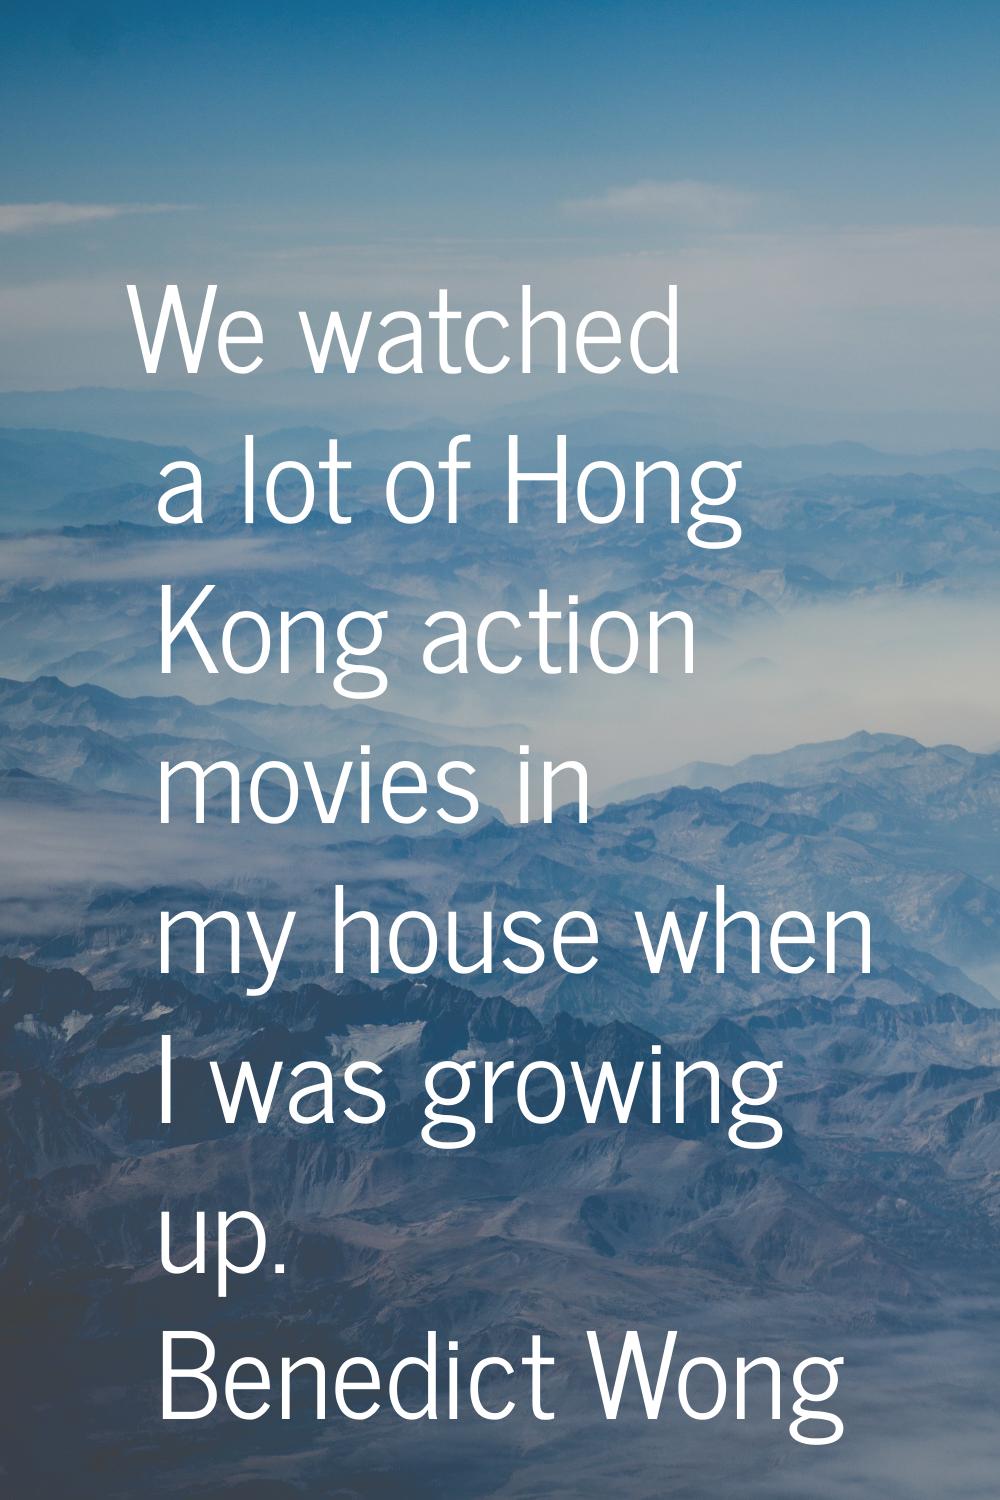 We watched a lot of Hong Kong action movies in my house when I was growing up.